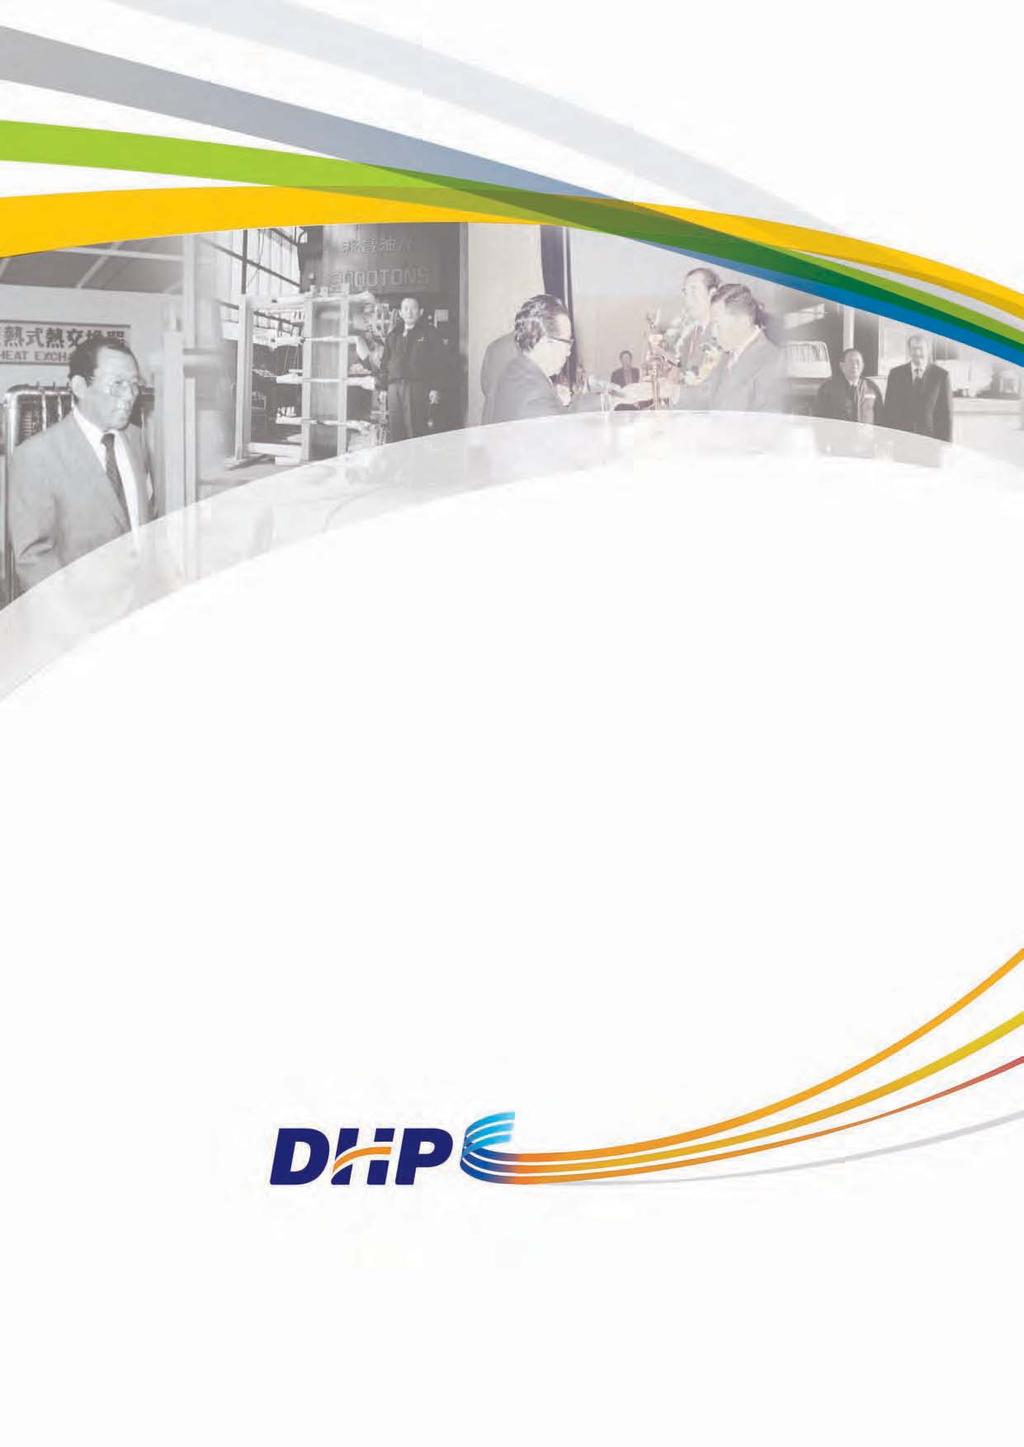 The attractive Company Creating absolute value Since 1978 DHP is the history itself. We have made the history sticking to its way nobody wants.